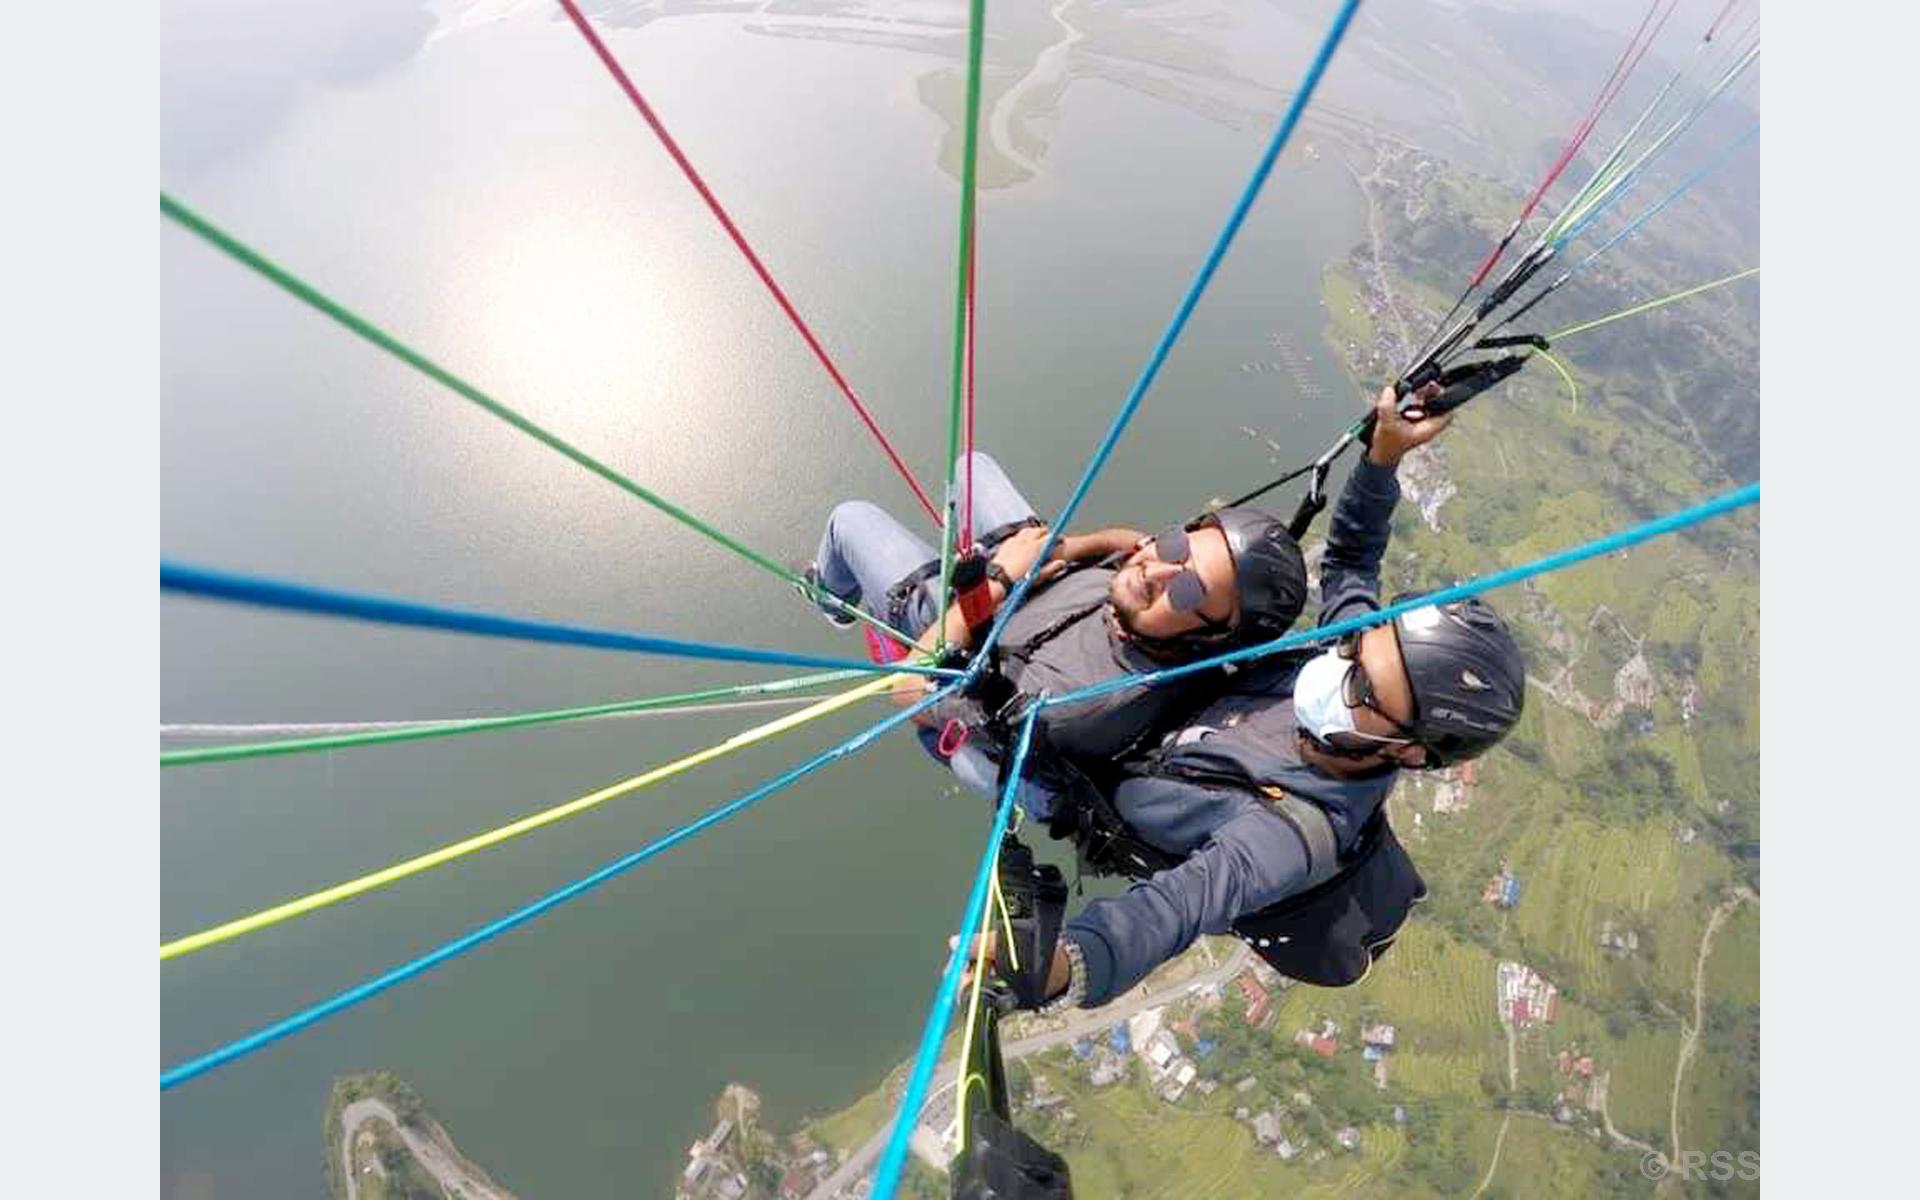 ‘Paragliding’ attracts domestic tourists in Pokhara